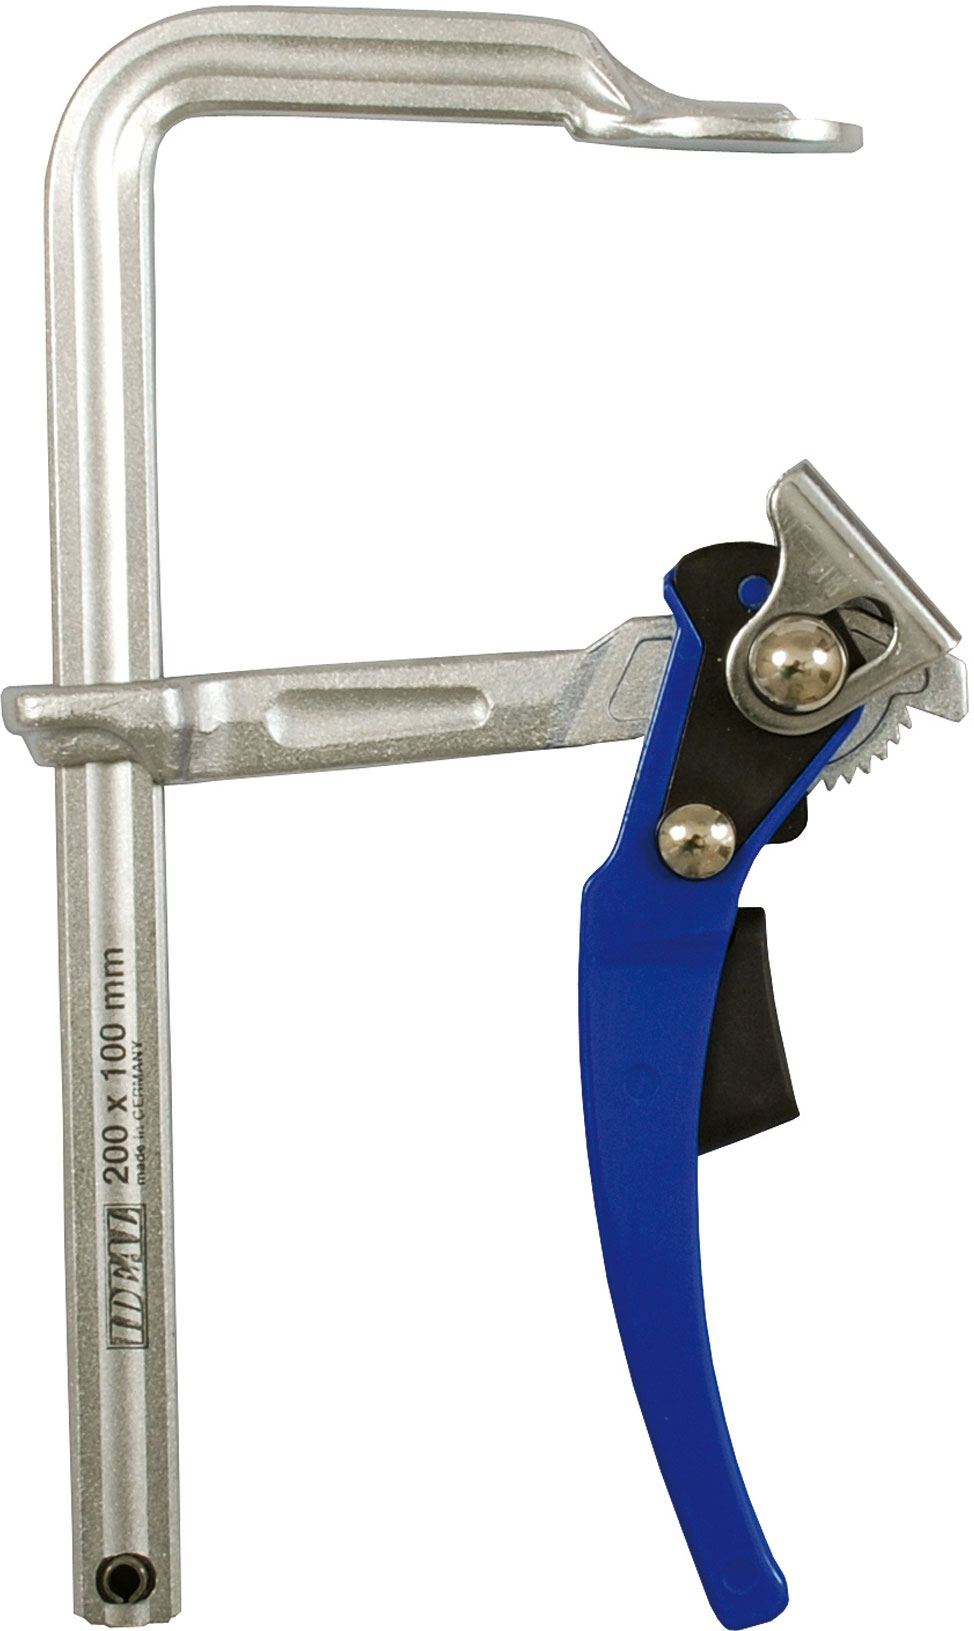 All-steel clamps with quick-lever handlle 